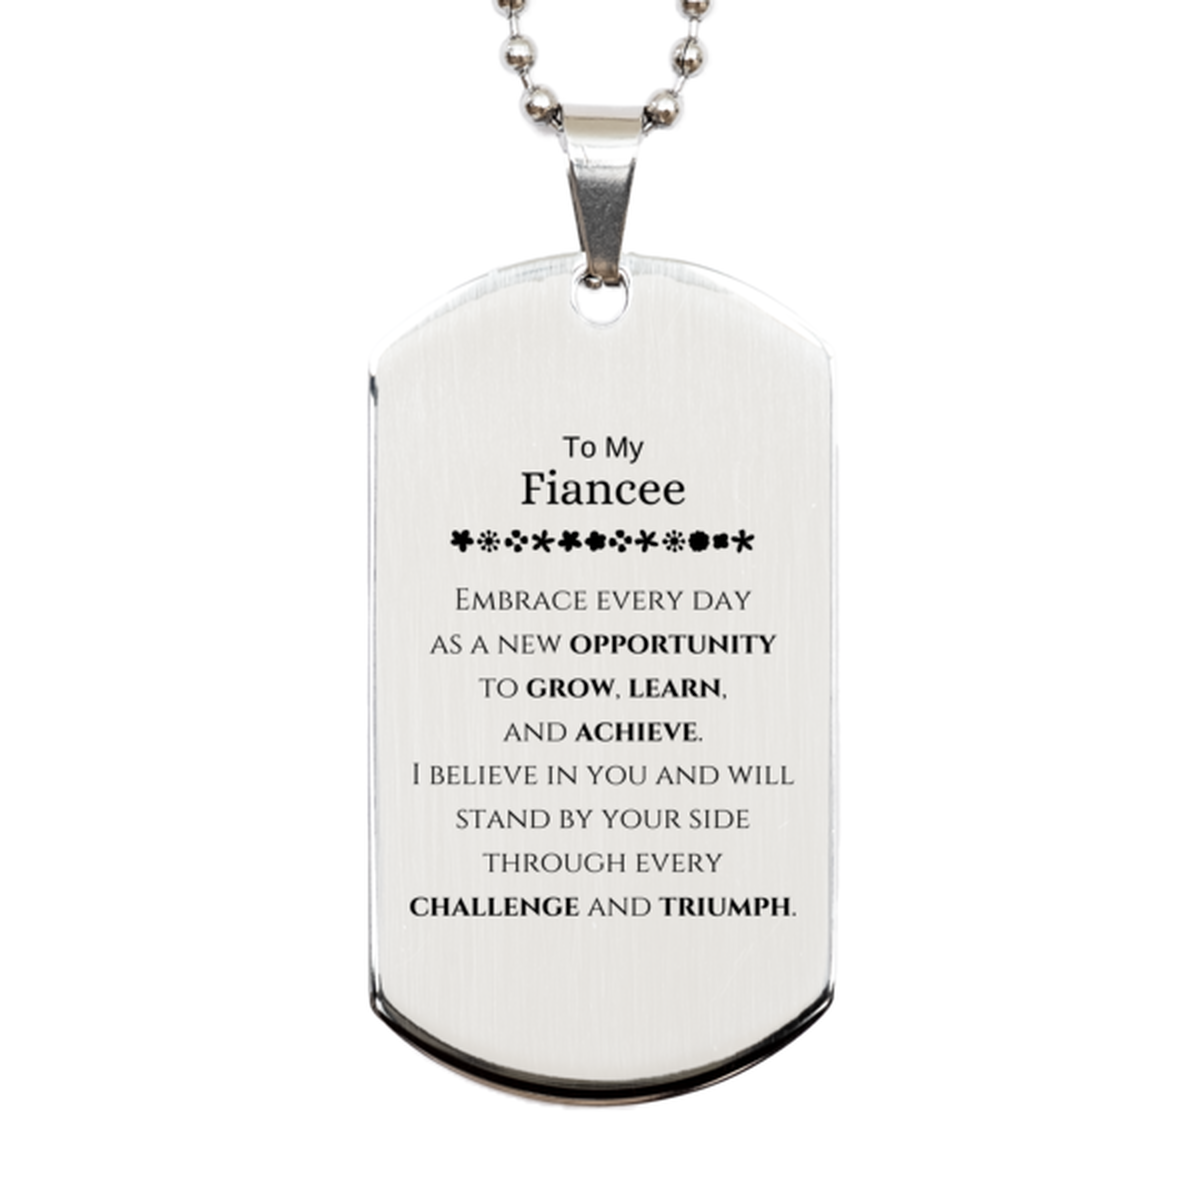 To My Fiancee Gifts, I believe in you and will stand by your side, Inspirational Silver Dog Tag For Fiancee, Birthday Christmas Motivational Fiancee Gifts